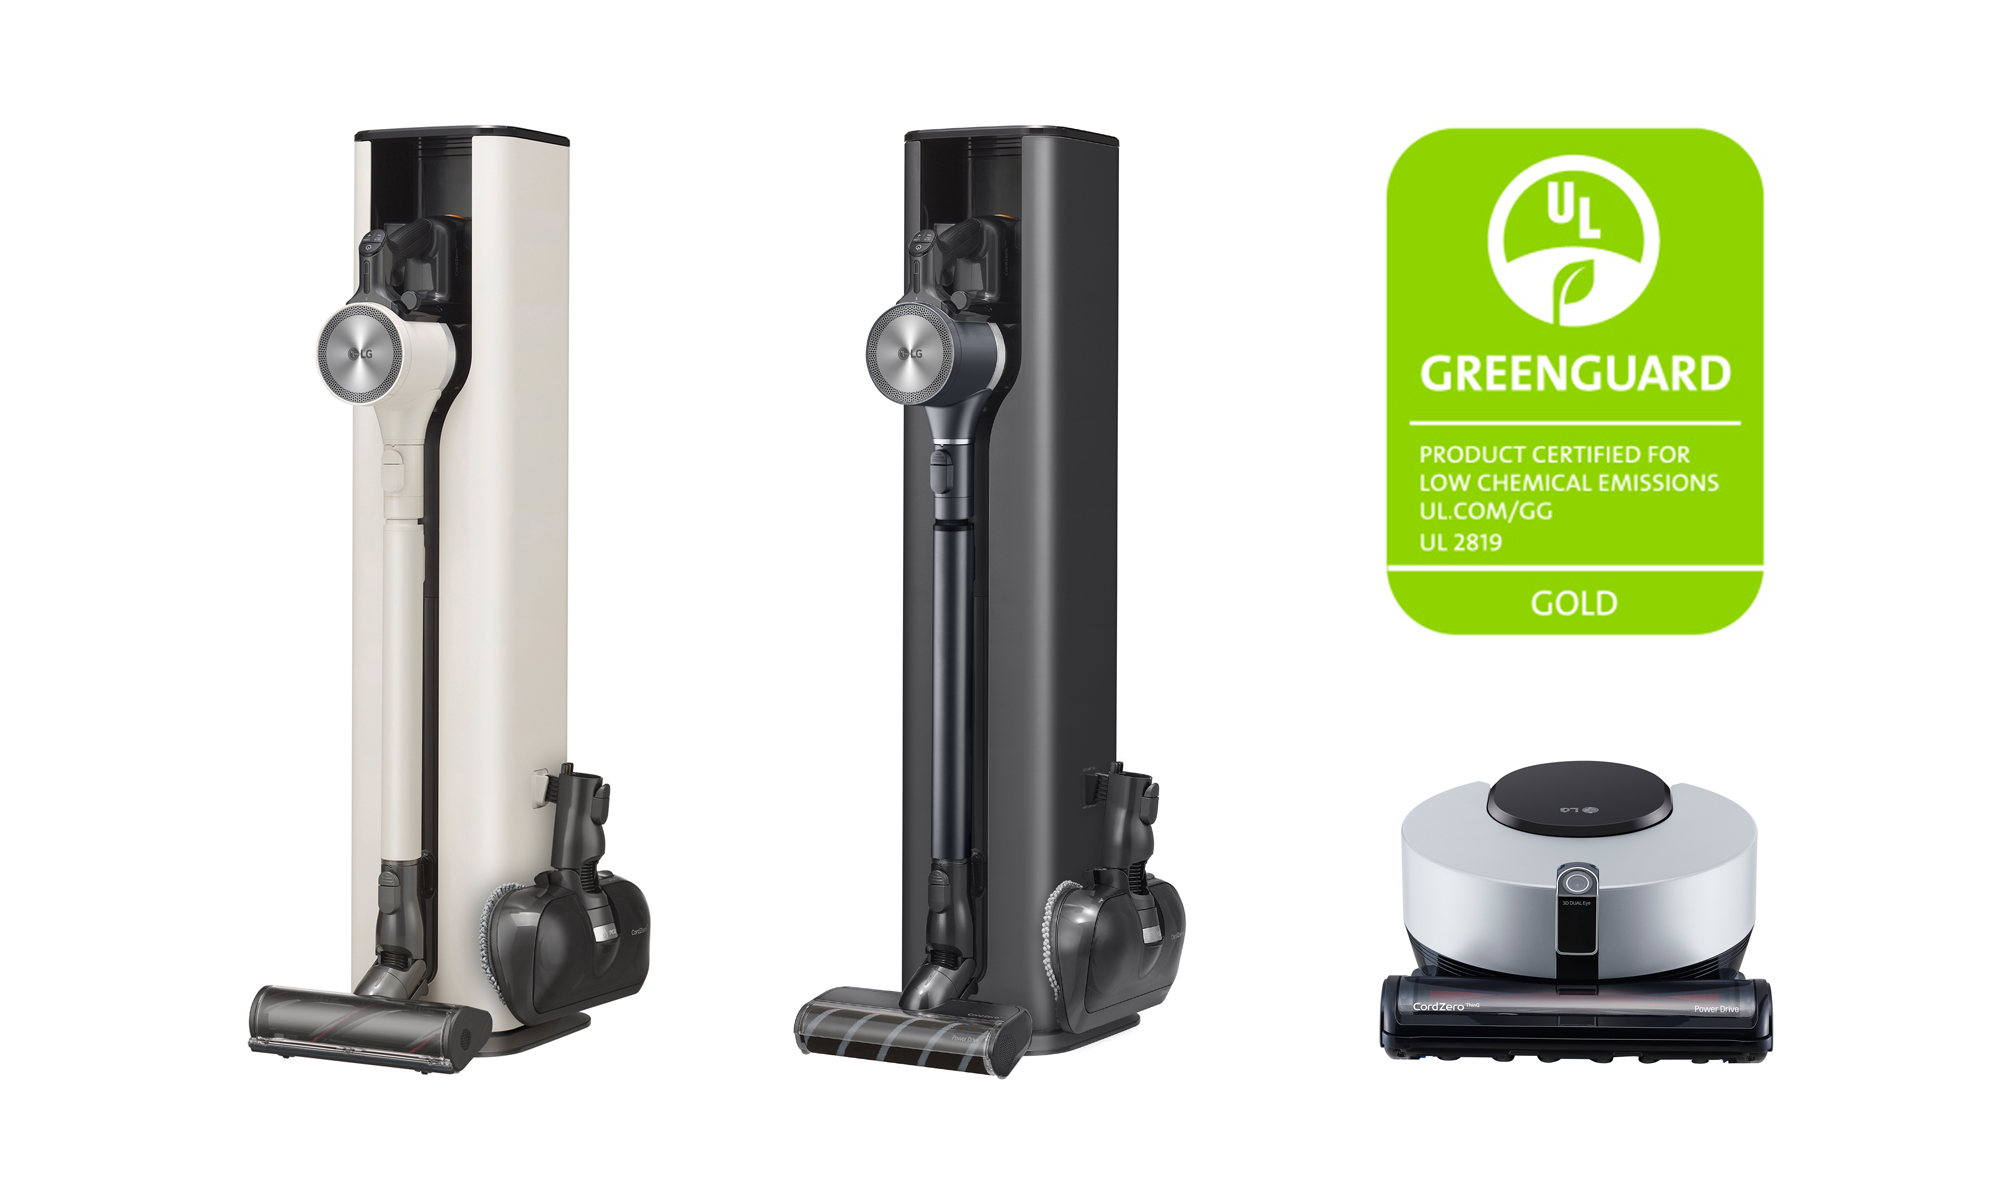 LG’s CordZero™ vacuum lineup products, including the LG CordZeroThinQ A9 Kompressor and CordZero A9 stick vacuums, CordZero R9 robot vacuum and the All-in-One Tower™, are first in the vacuum cleaner category to earn UL’s certification